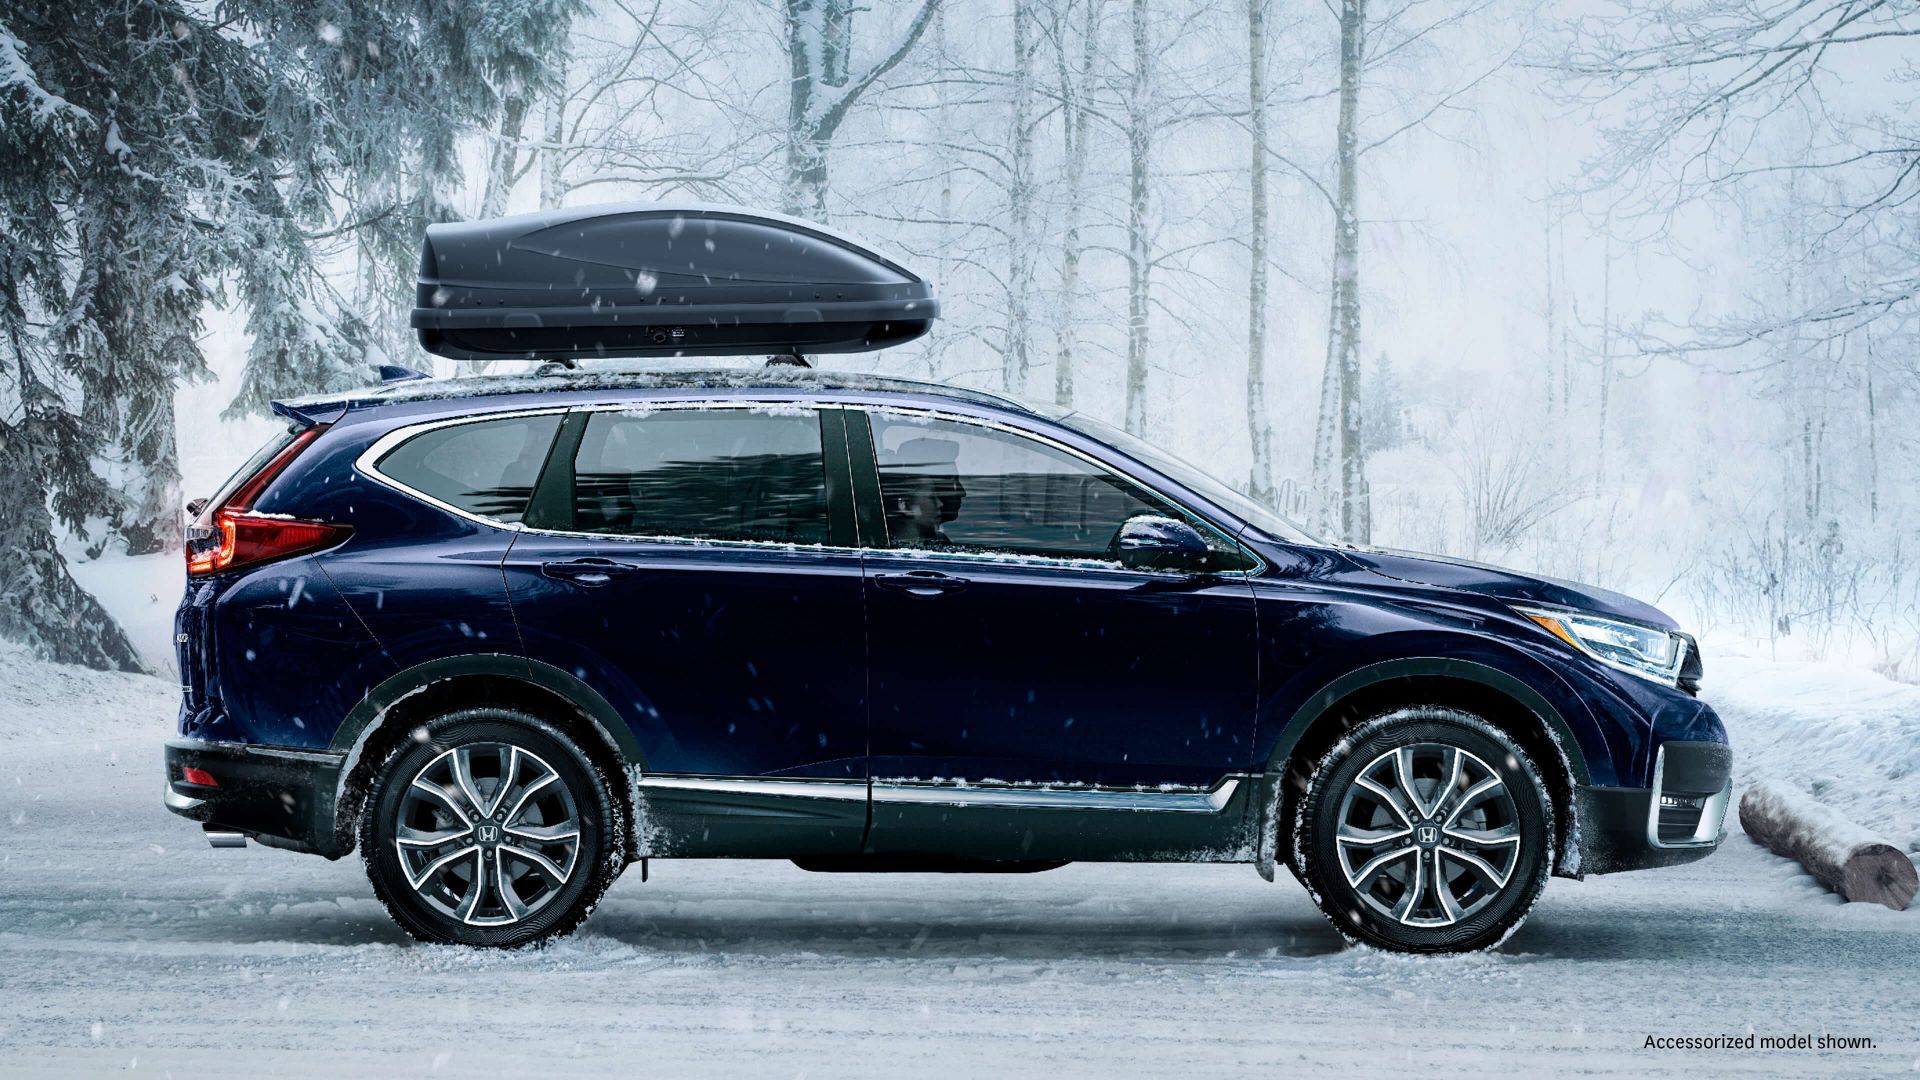 New 2019 Honda SUVs Have Something for Every Need